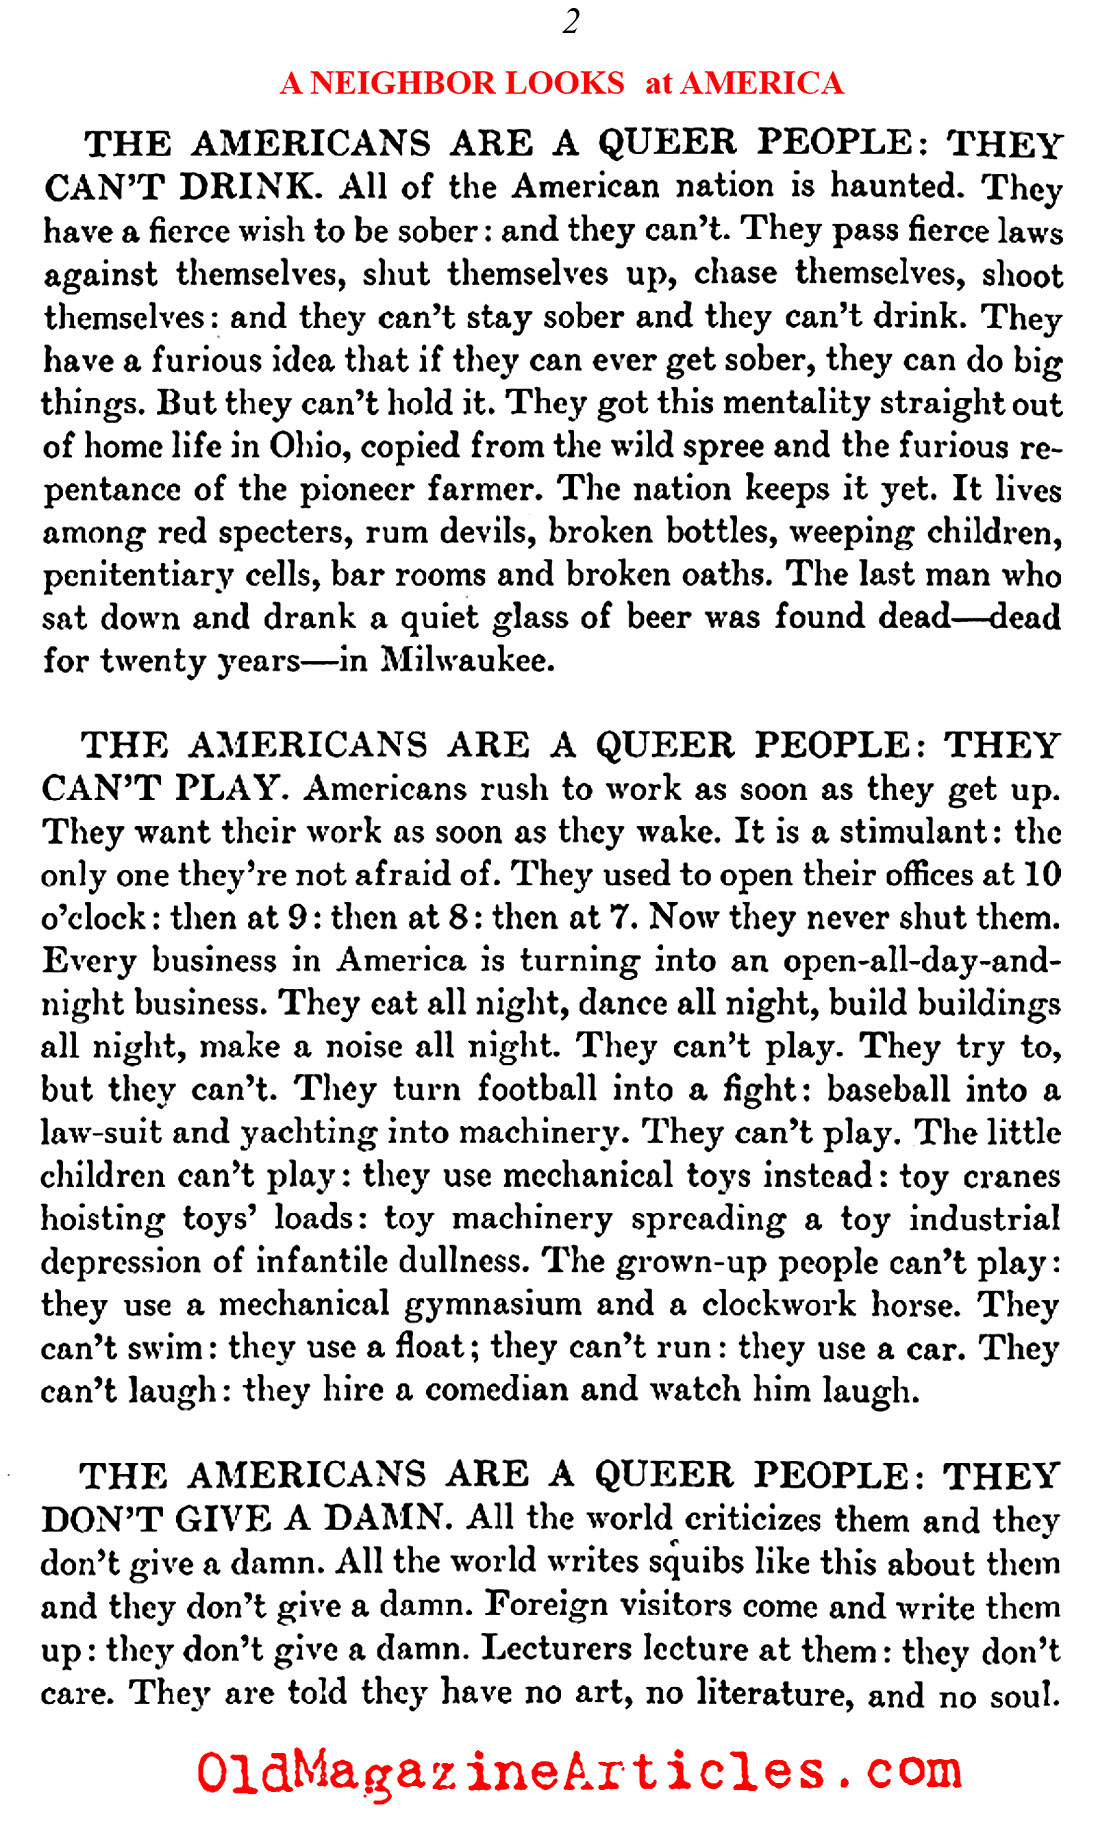 Americans Are A Strange People  (Characteristically American, 1932)